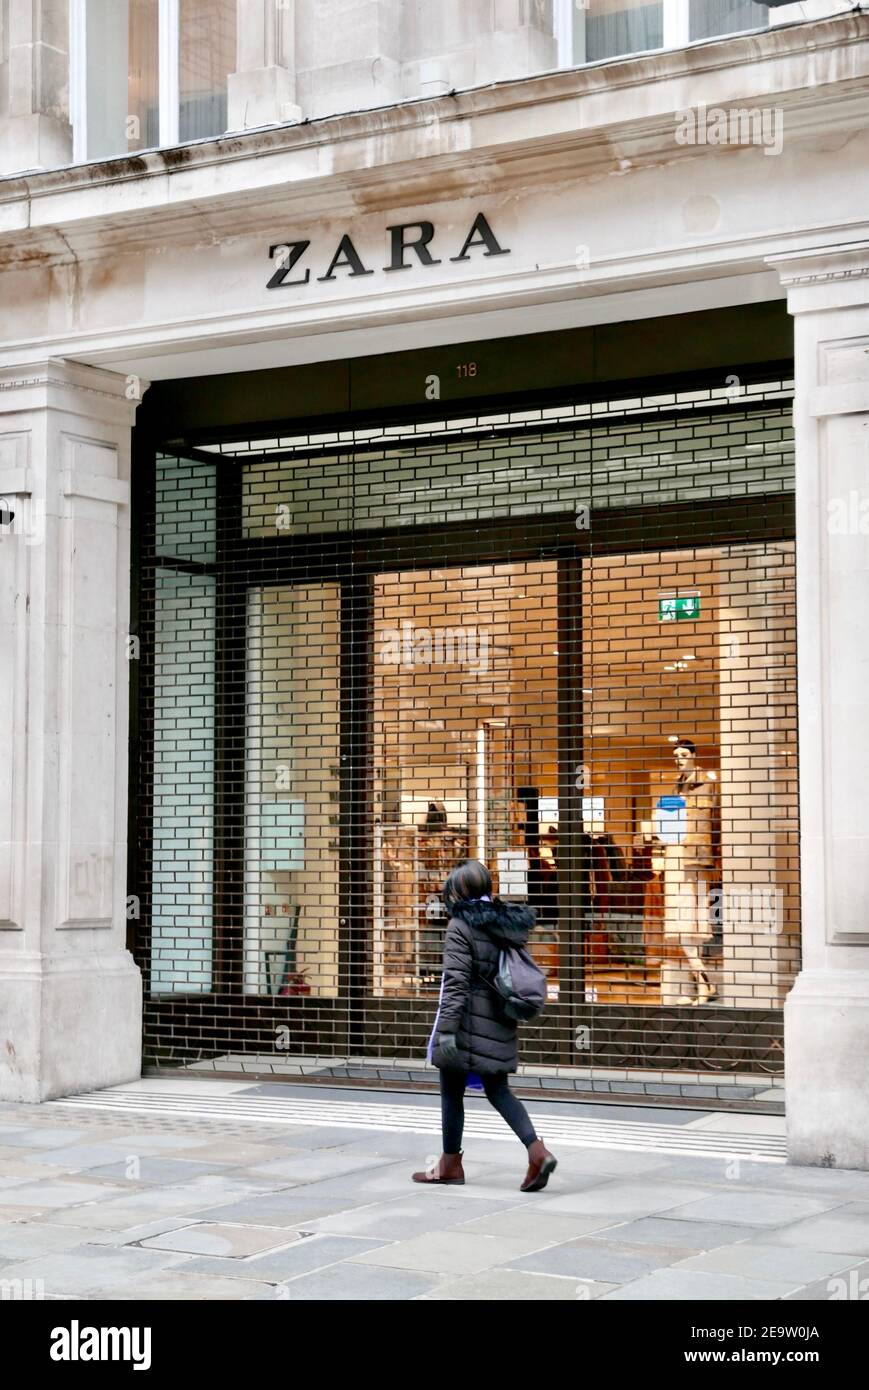 A young woman walks past Zara clothes shop currently closed due to covid19 pandemic lockdown which is impacting the economy. Regent Street, London, UK Stock Photo